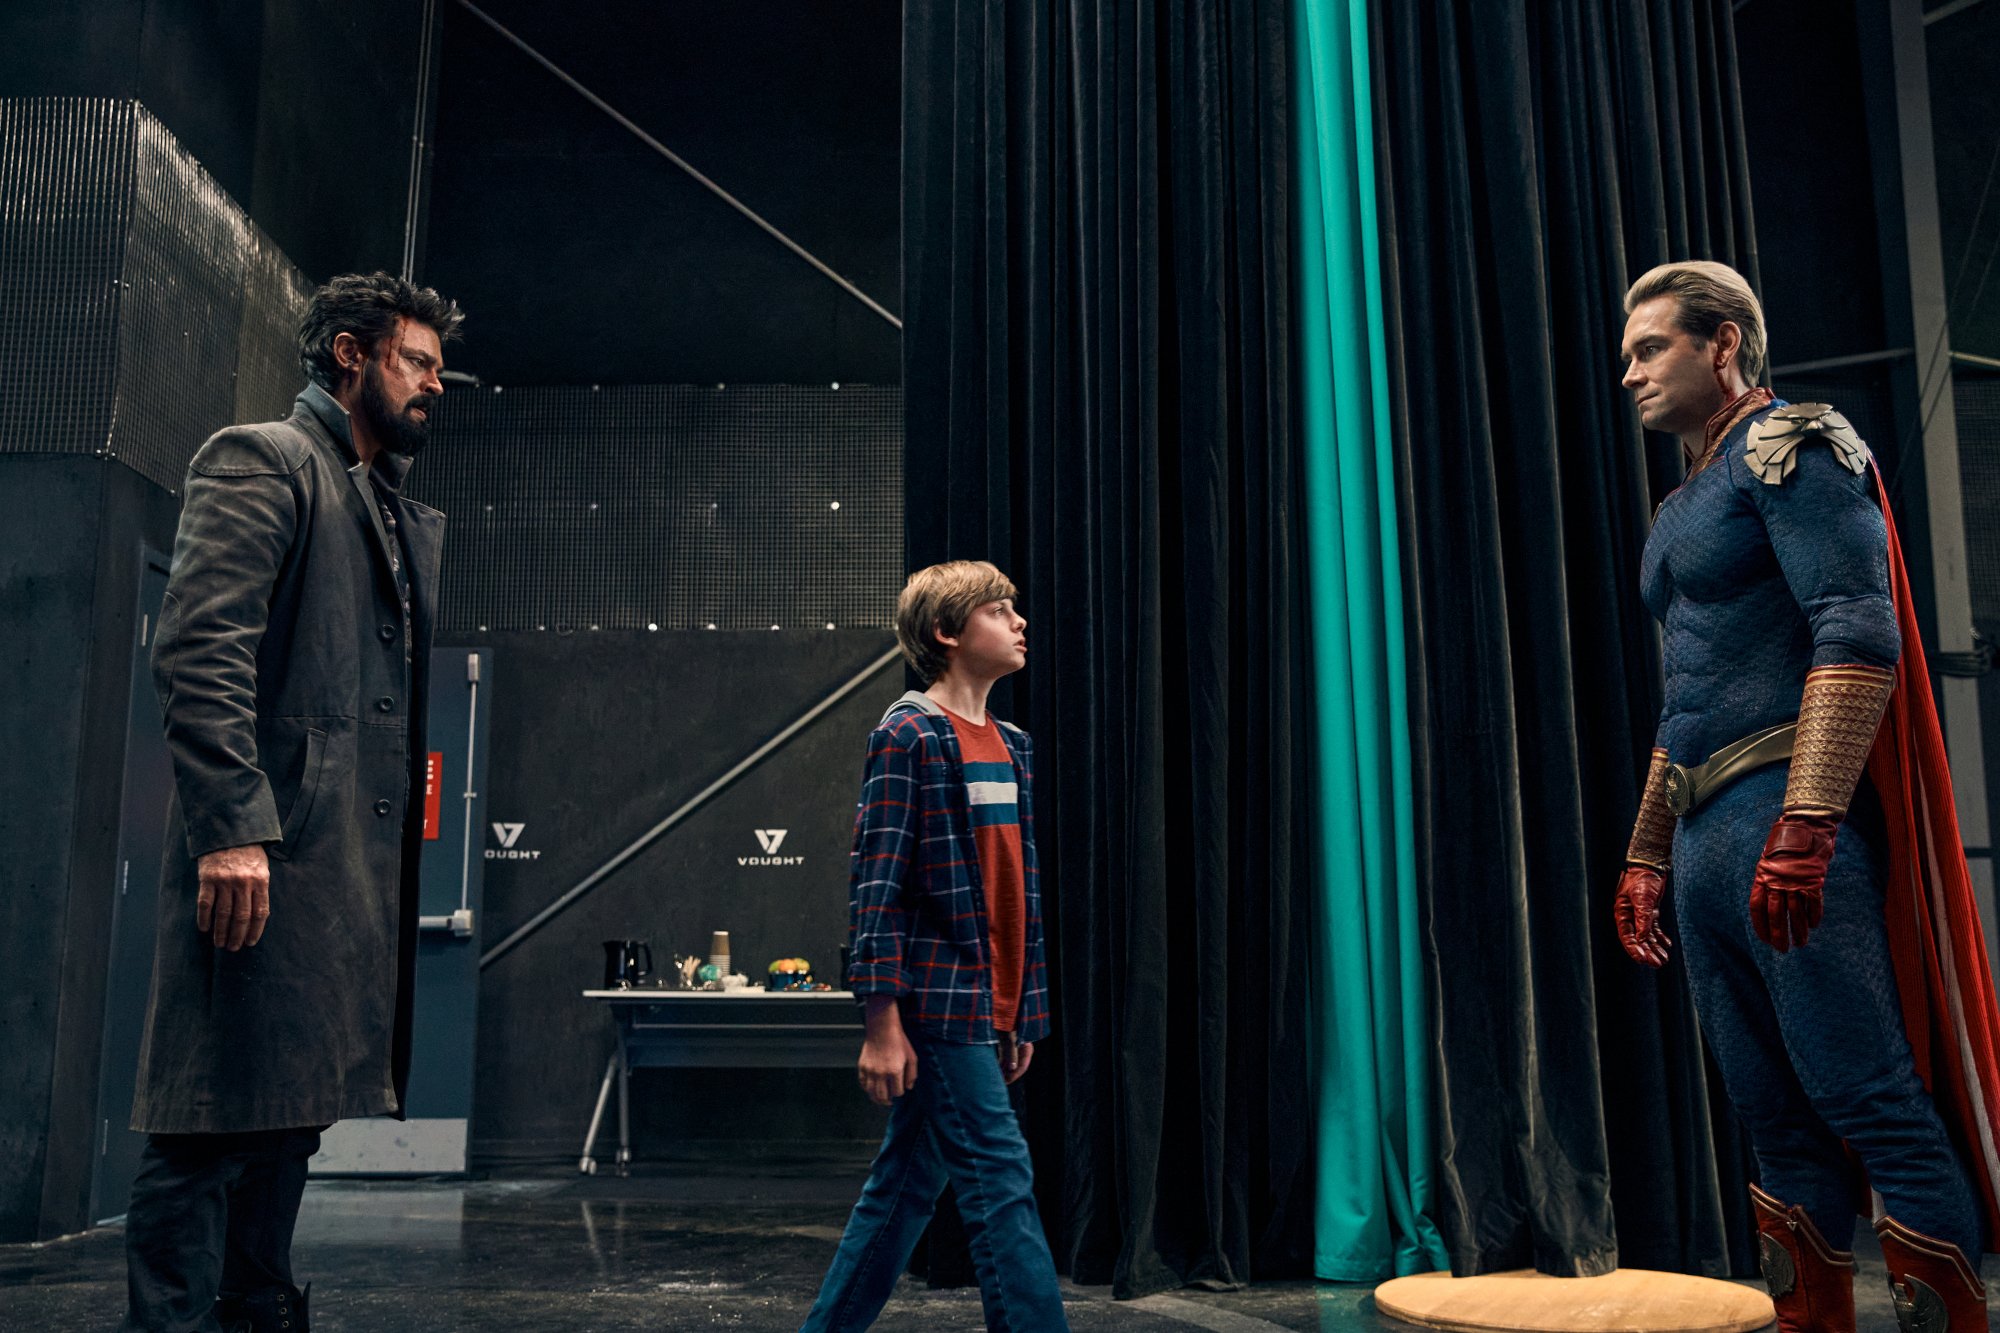 'The Boys' cast members Karl Urban, Cameron Crovetti, and Antony Starr as Billy Butcher, Ryan, and Homelander, all whom will appear in season 4. Butcher and Homelander are staring at each other, and Ryan is walking toward Homelander.